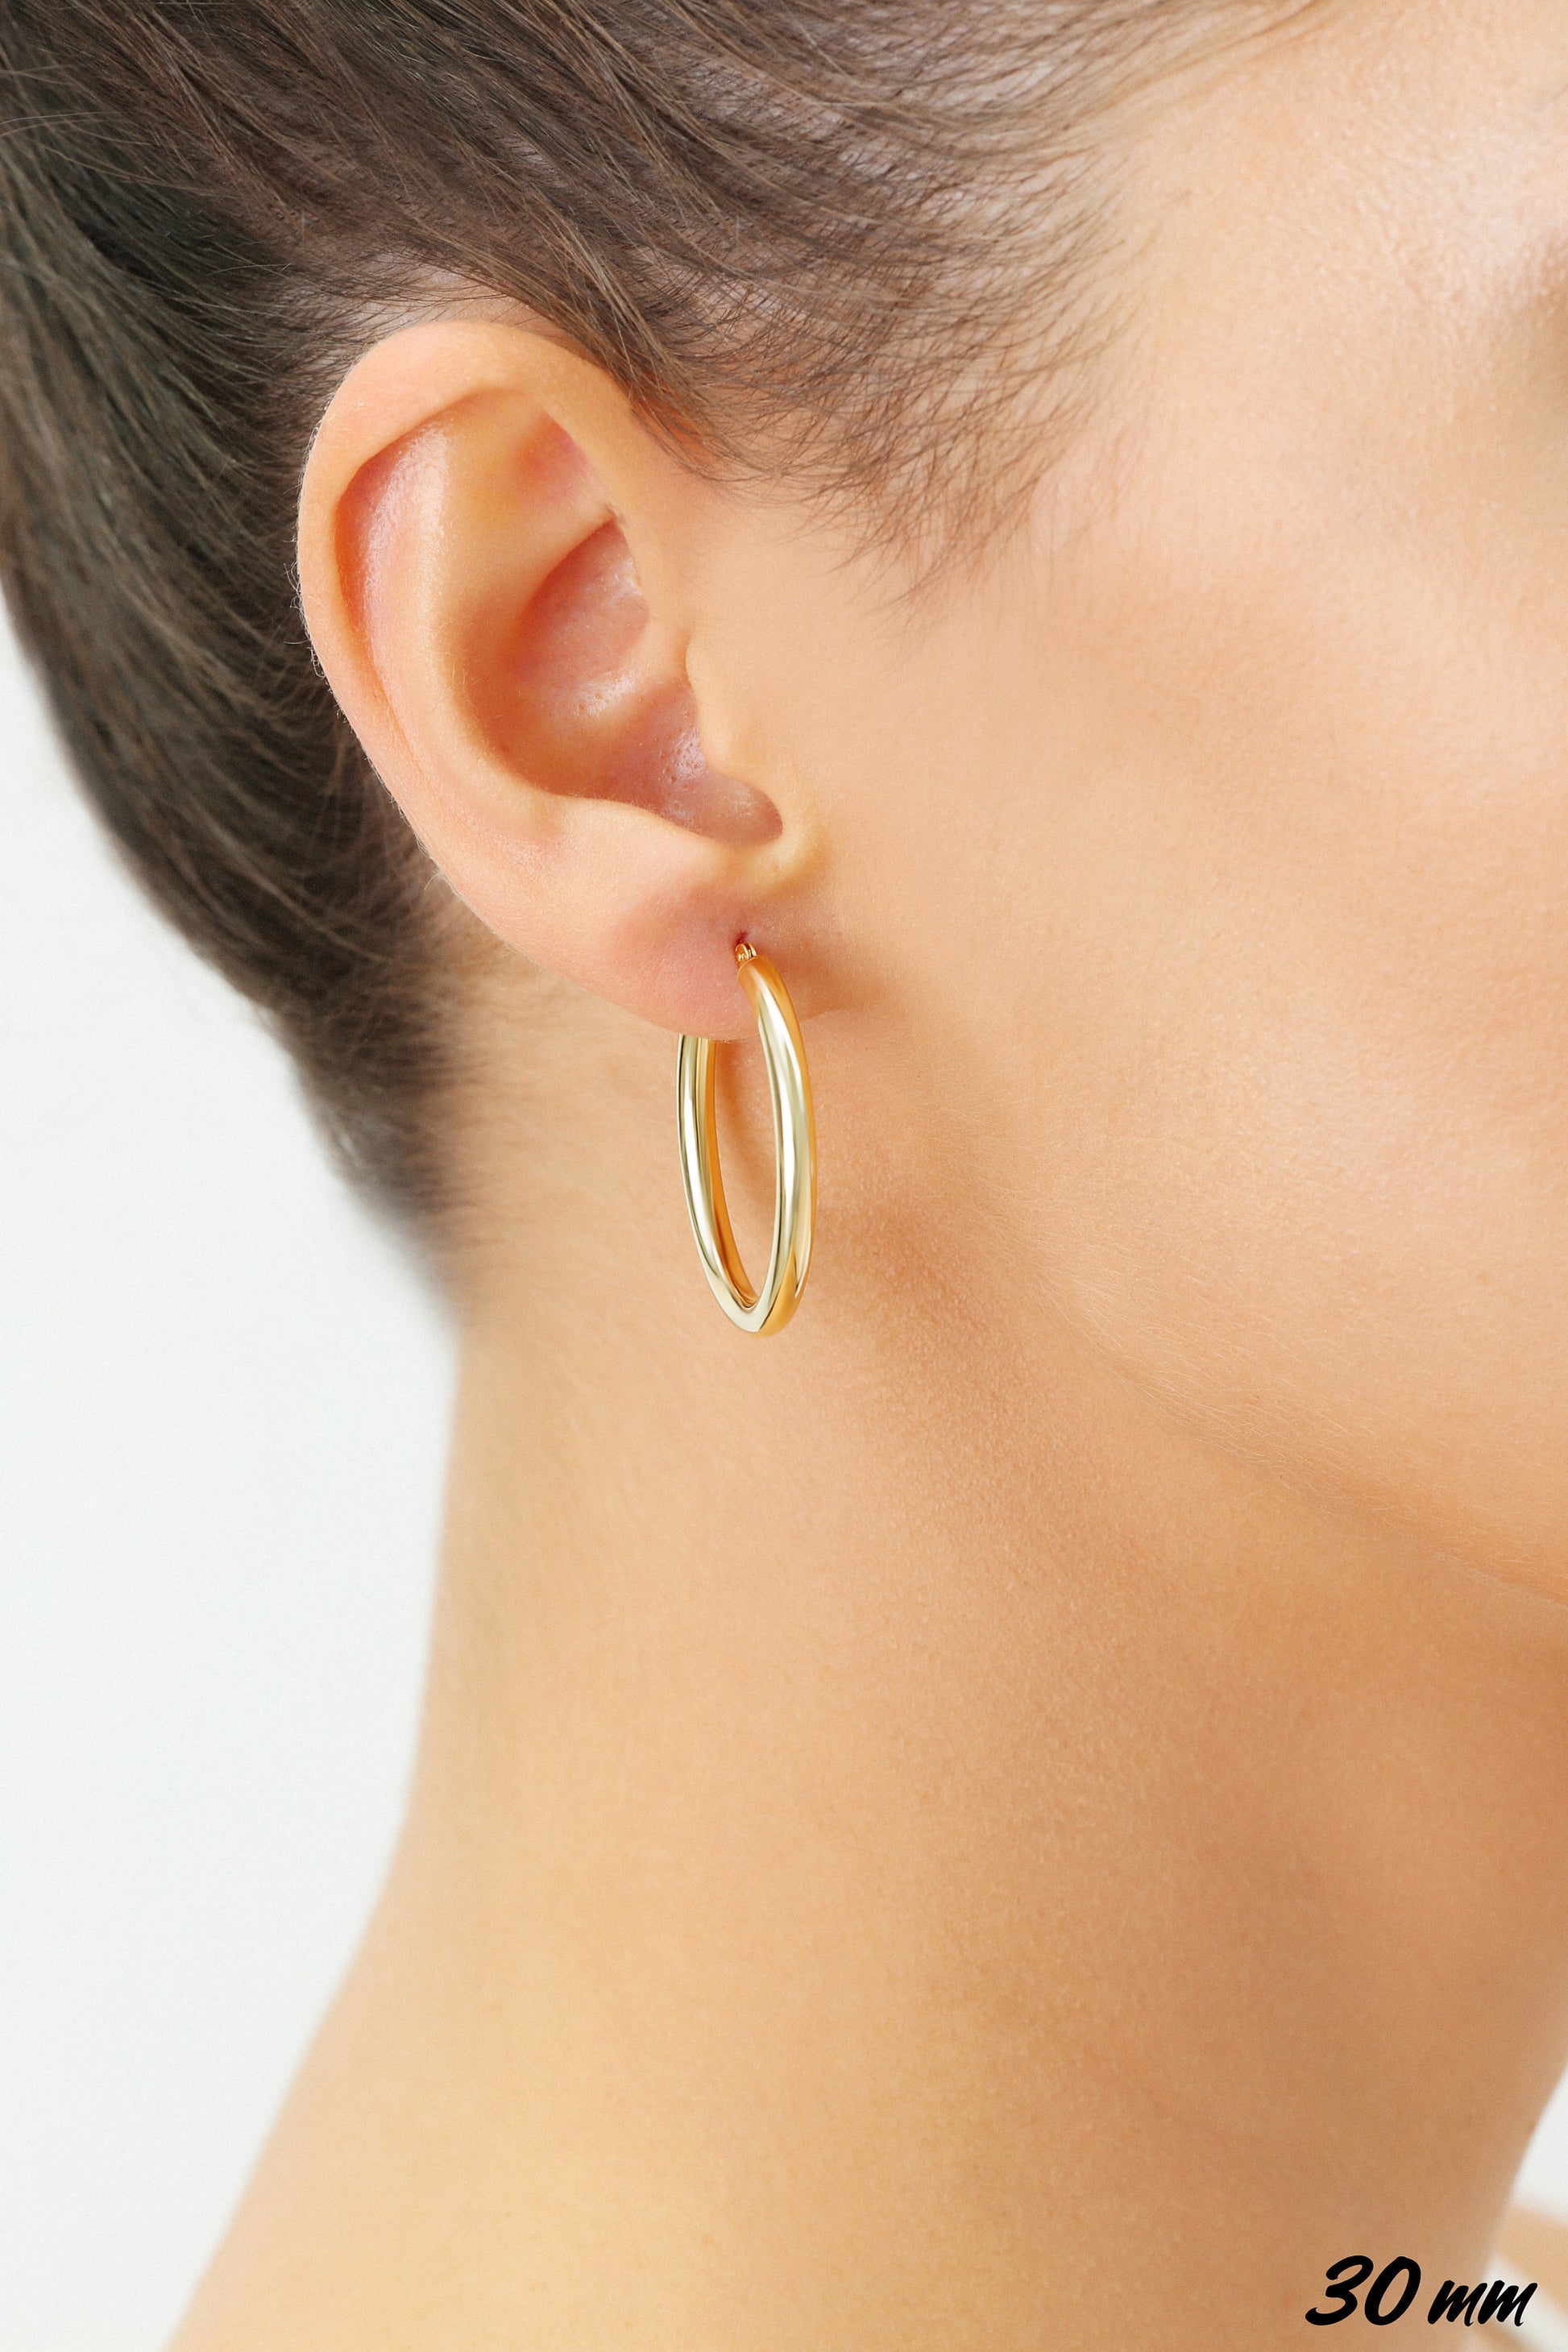 Gold Hoop Earrings 14K Yellow White Gold Polished & Satin D/C Hoop Earrings  3mm Thickness - Roy Rose Jewelry